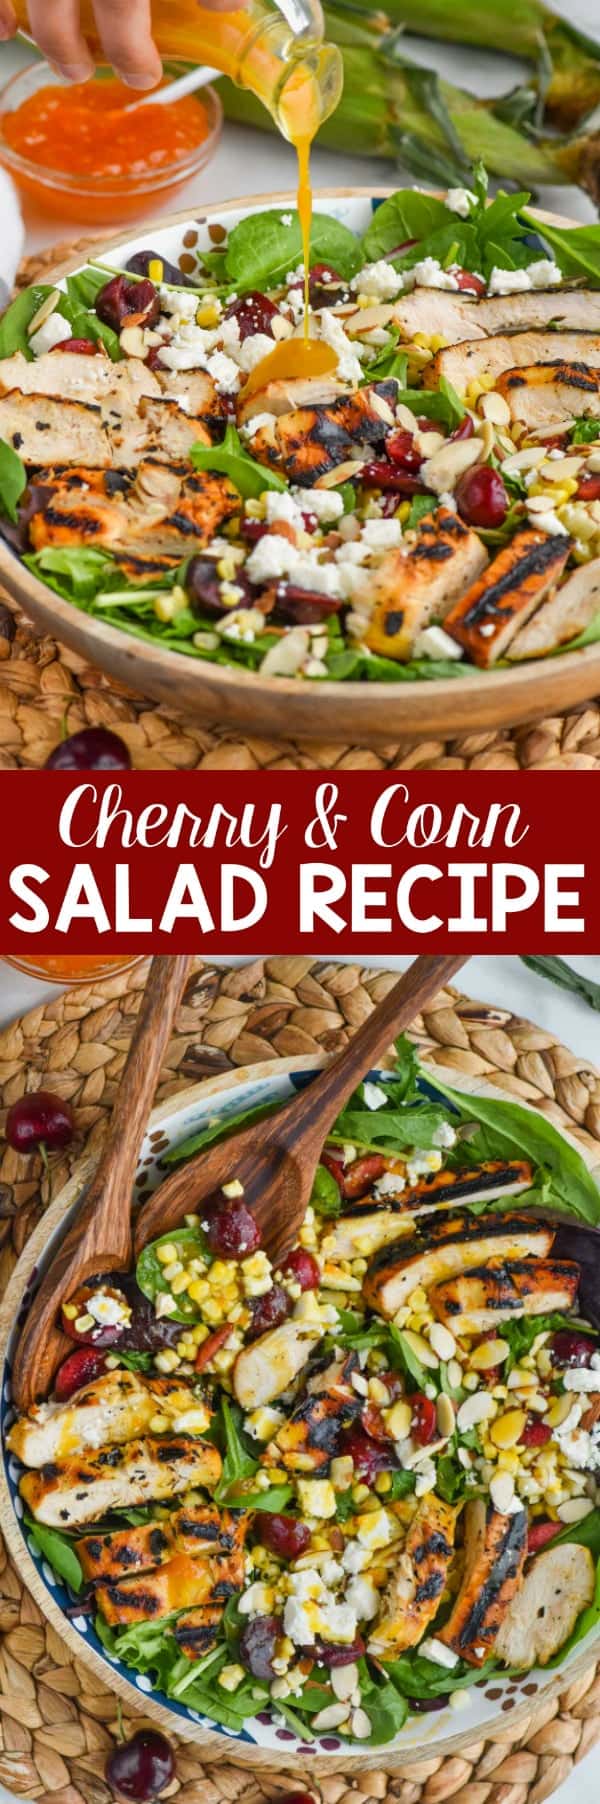 A collage of two photos: the salad dressing is being poured on top of the salad and an overhead photo of the Cherry and Corn Salad